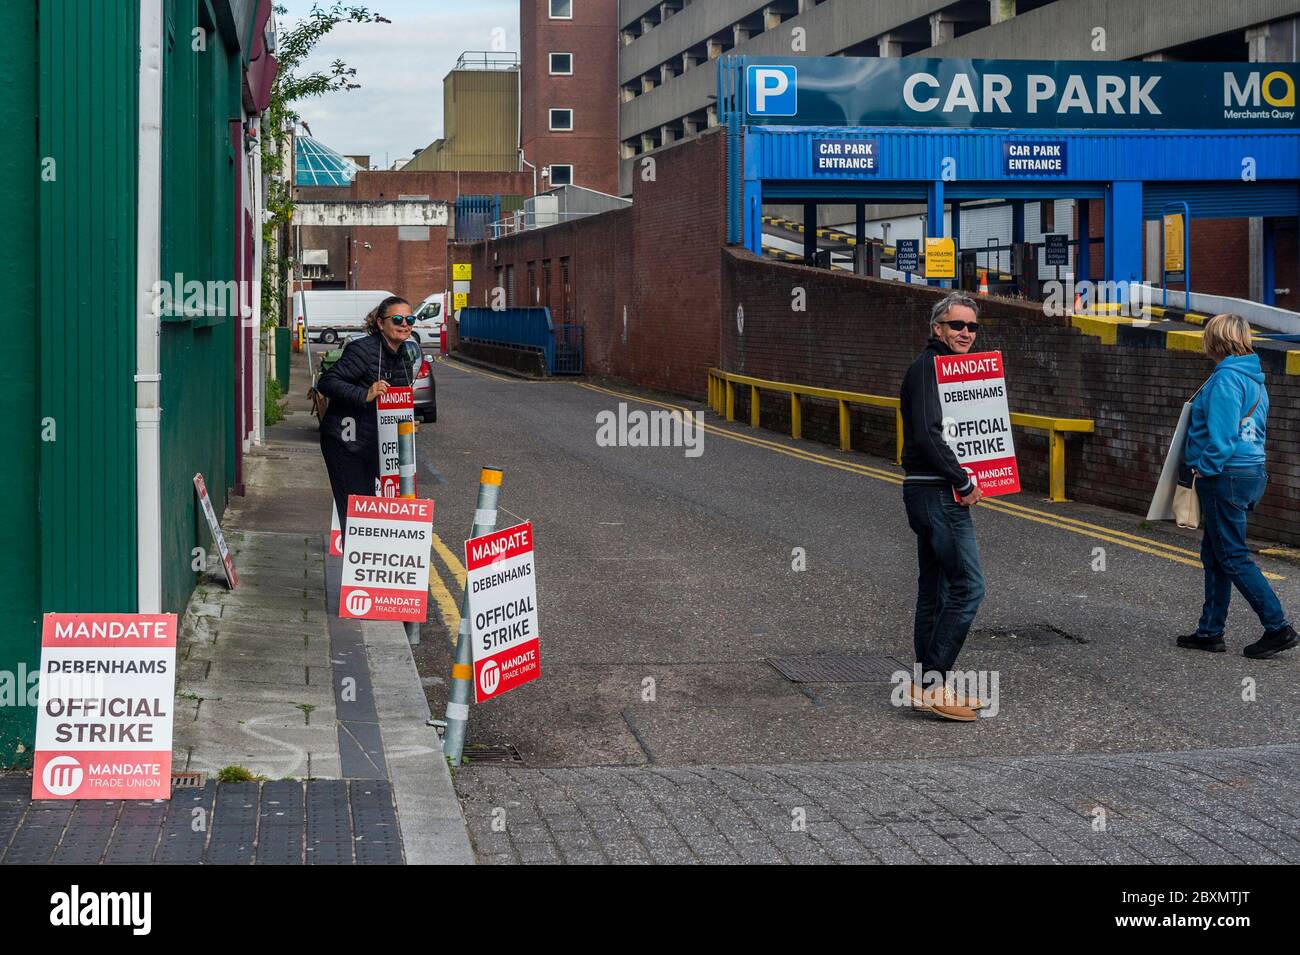 Cork, Ireland. 8th June, 2020. Sacked Debenhams workers from the Cork City store were still picketing the delivery entrance today. The staff are protesting in an attempt to garner a redundancy package from the company, which has gone into liquidation. Credit: AG News/Alamy Live News Stock Photo